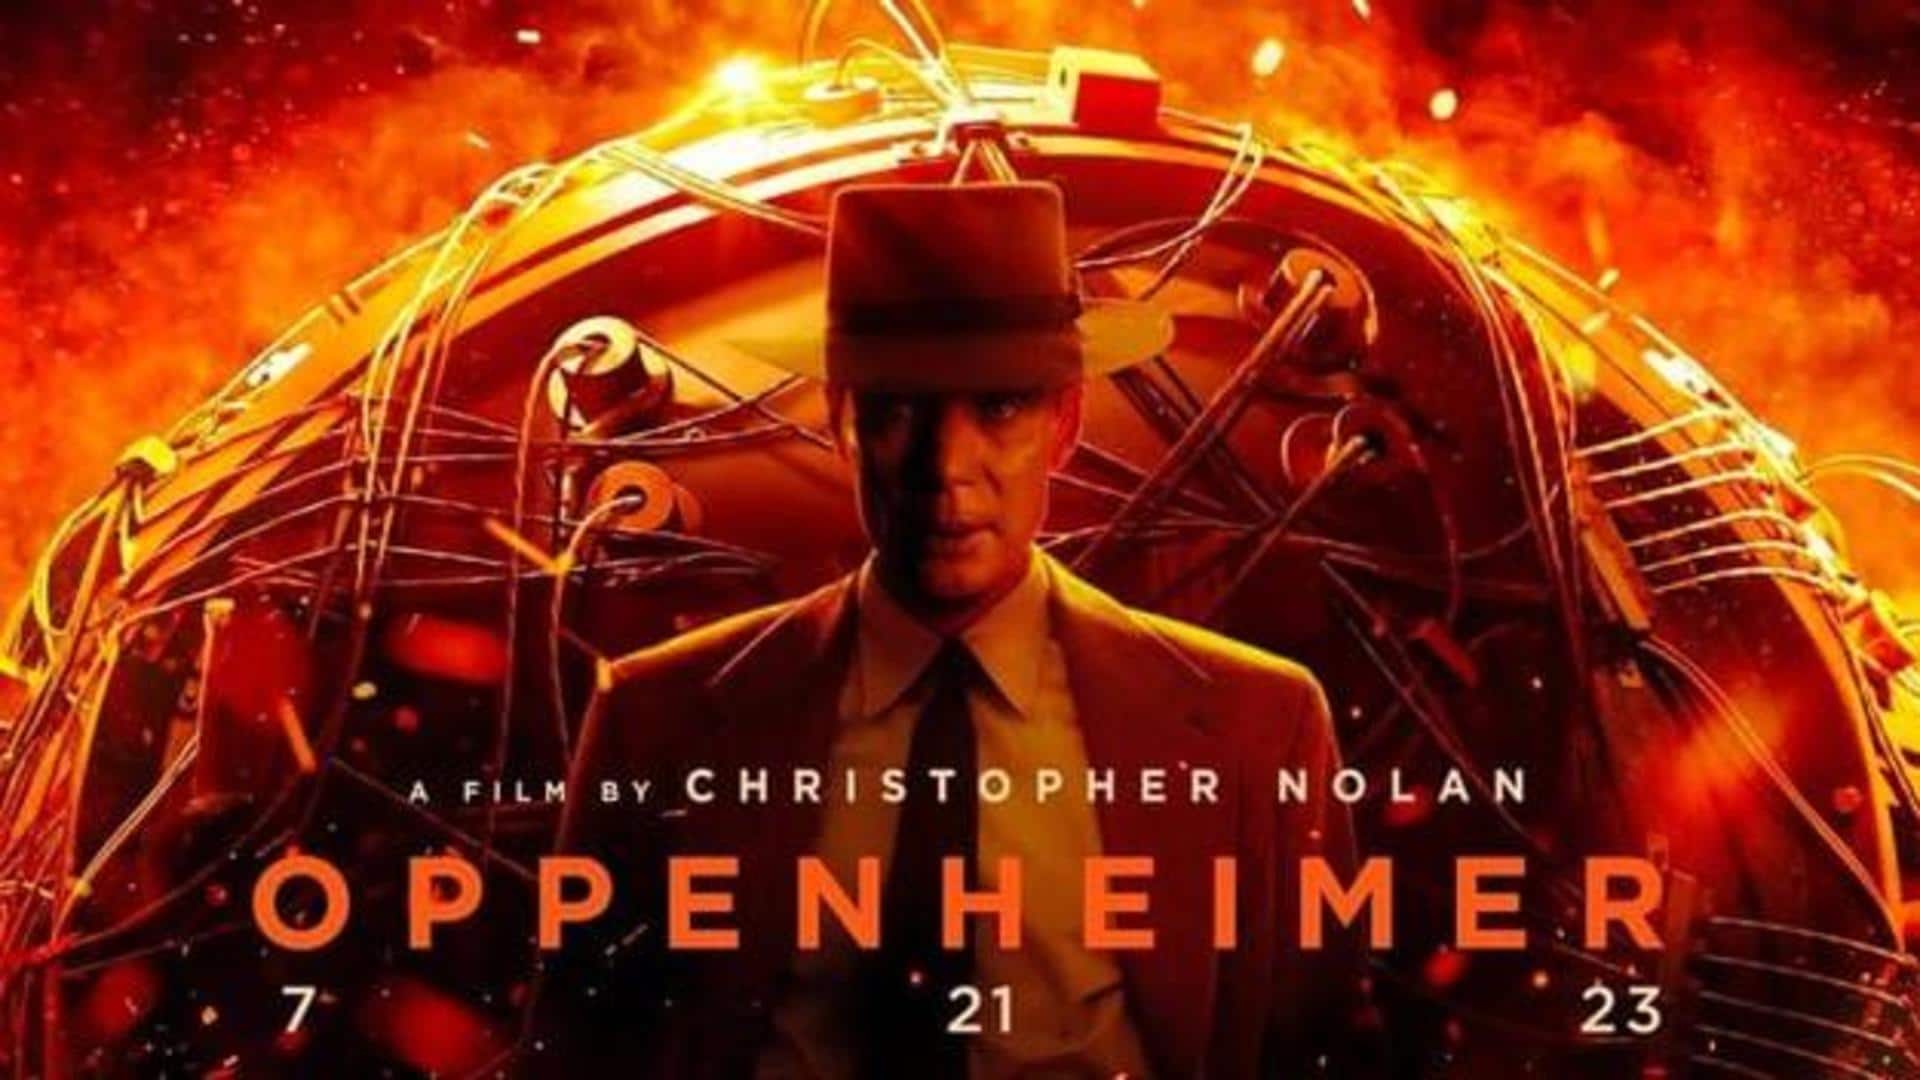 'Oppenheimer': Christopher Nolan's first R-rated film since 2002's 'Insomnia'